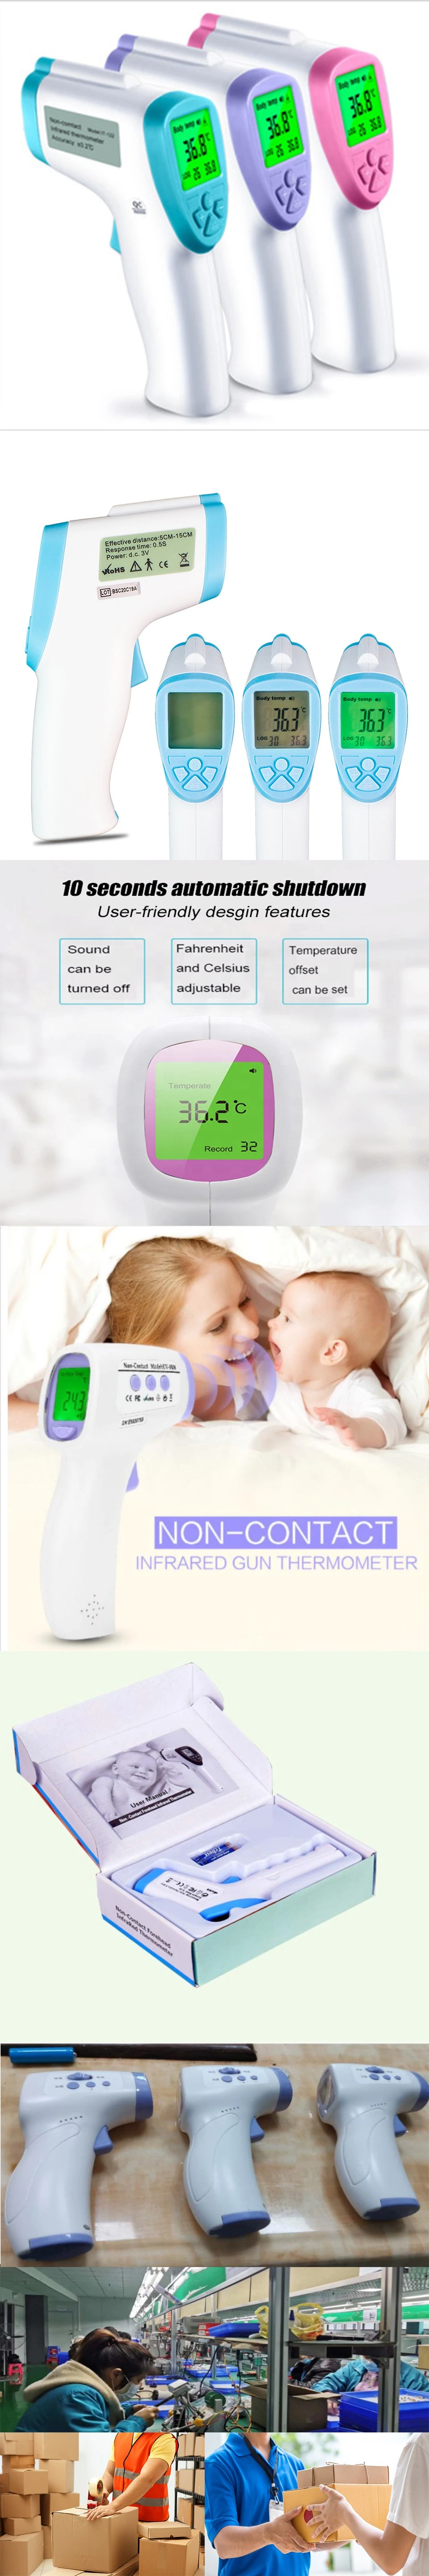 Body Infrared Thermometer Thermometer Fever Infrared Thermometer Gun